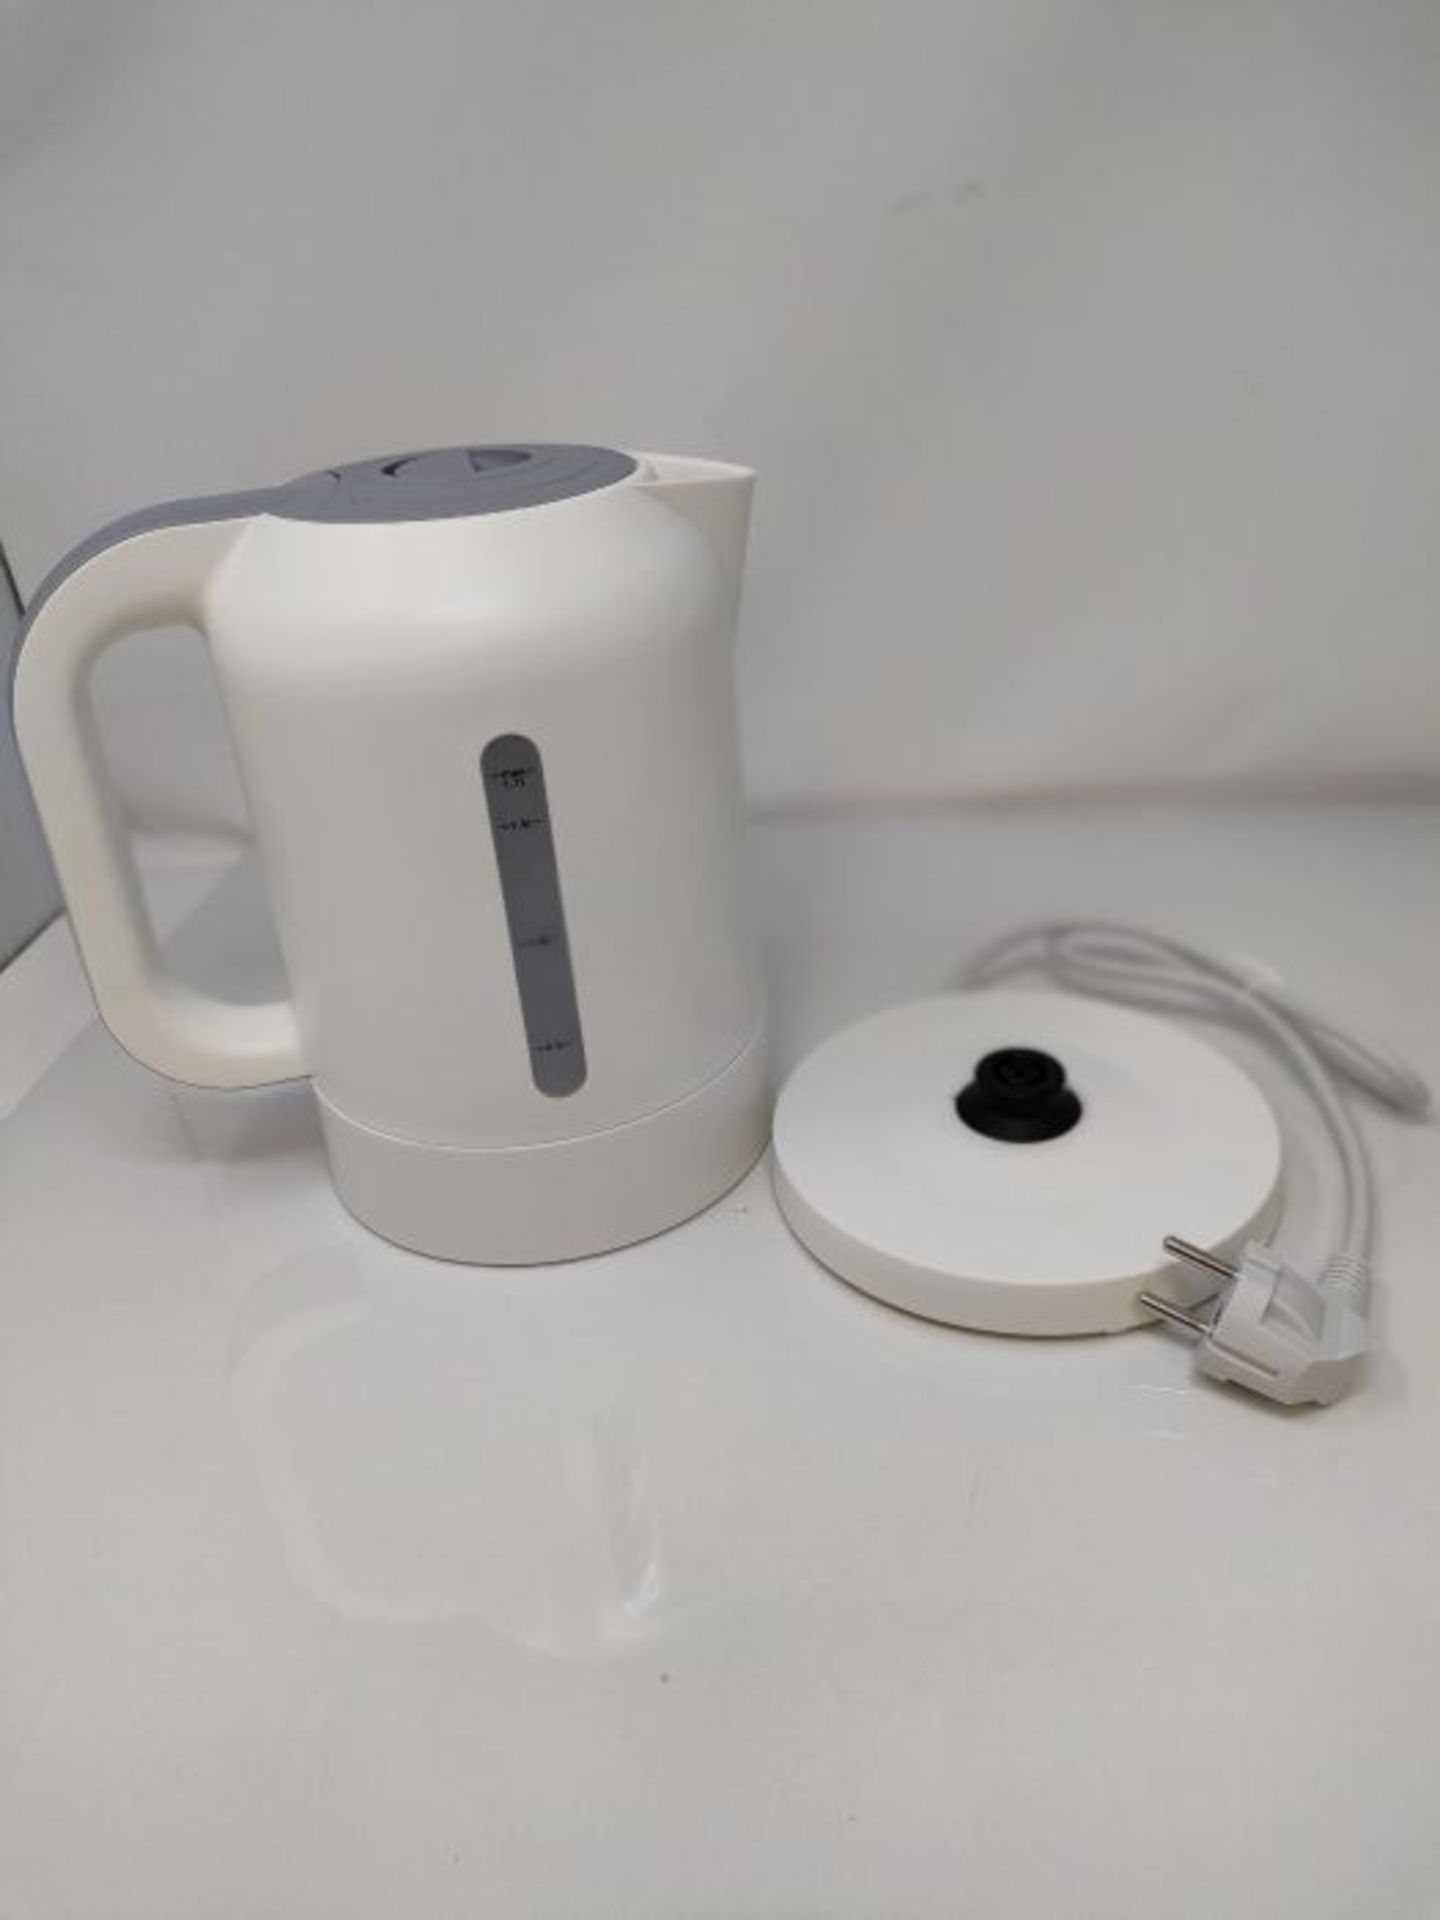 Russell Hobbs 21150-70 electrical kettle - electric kettles - Image 3 of 3